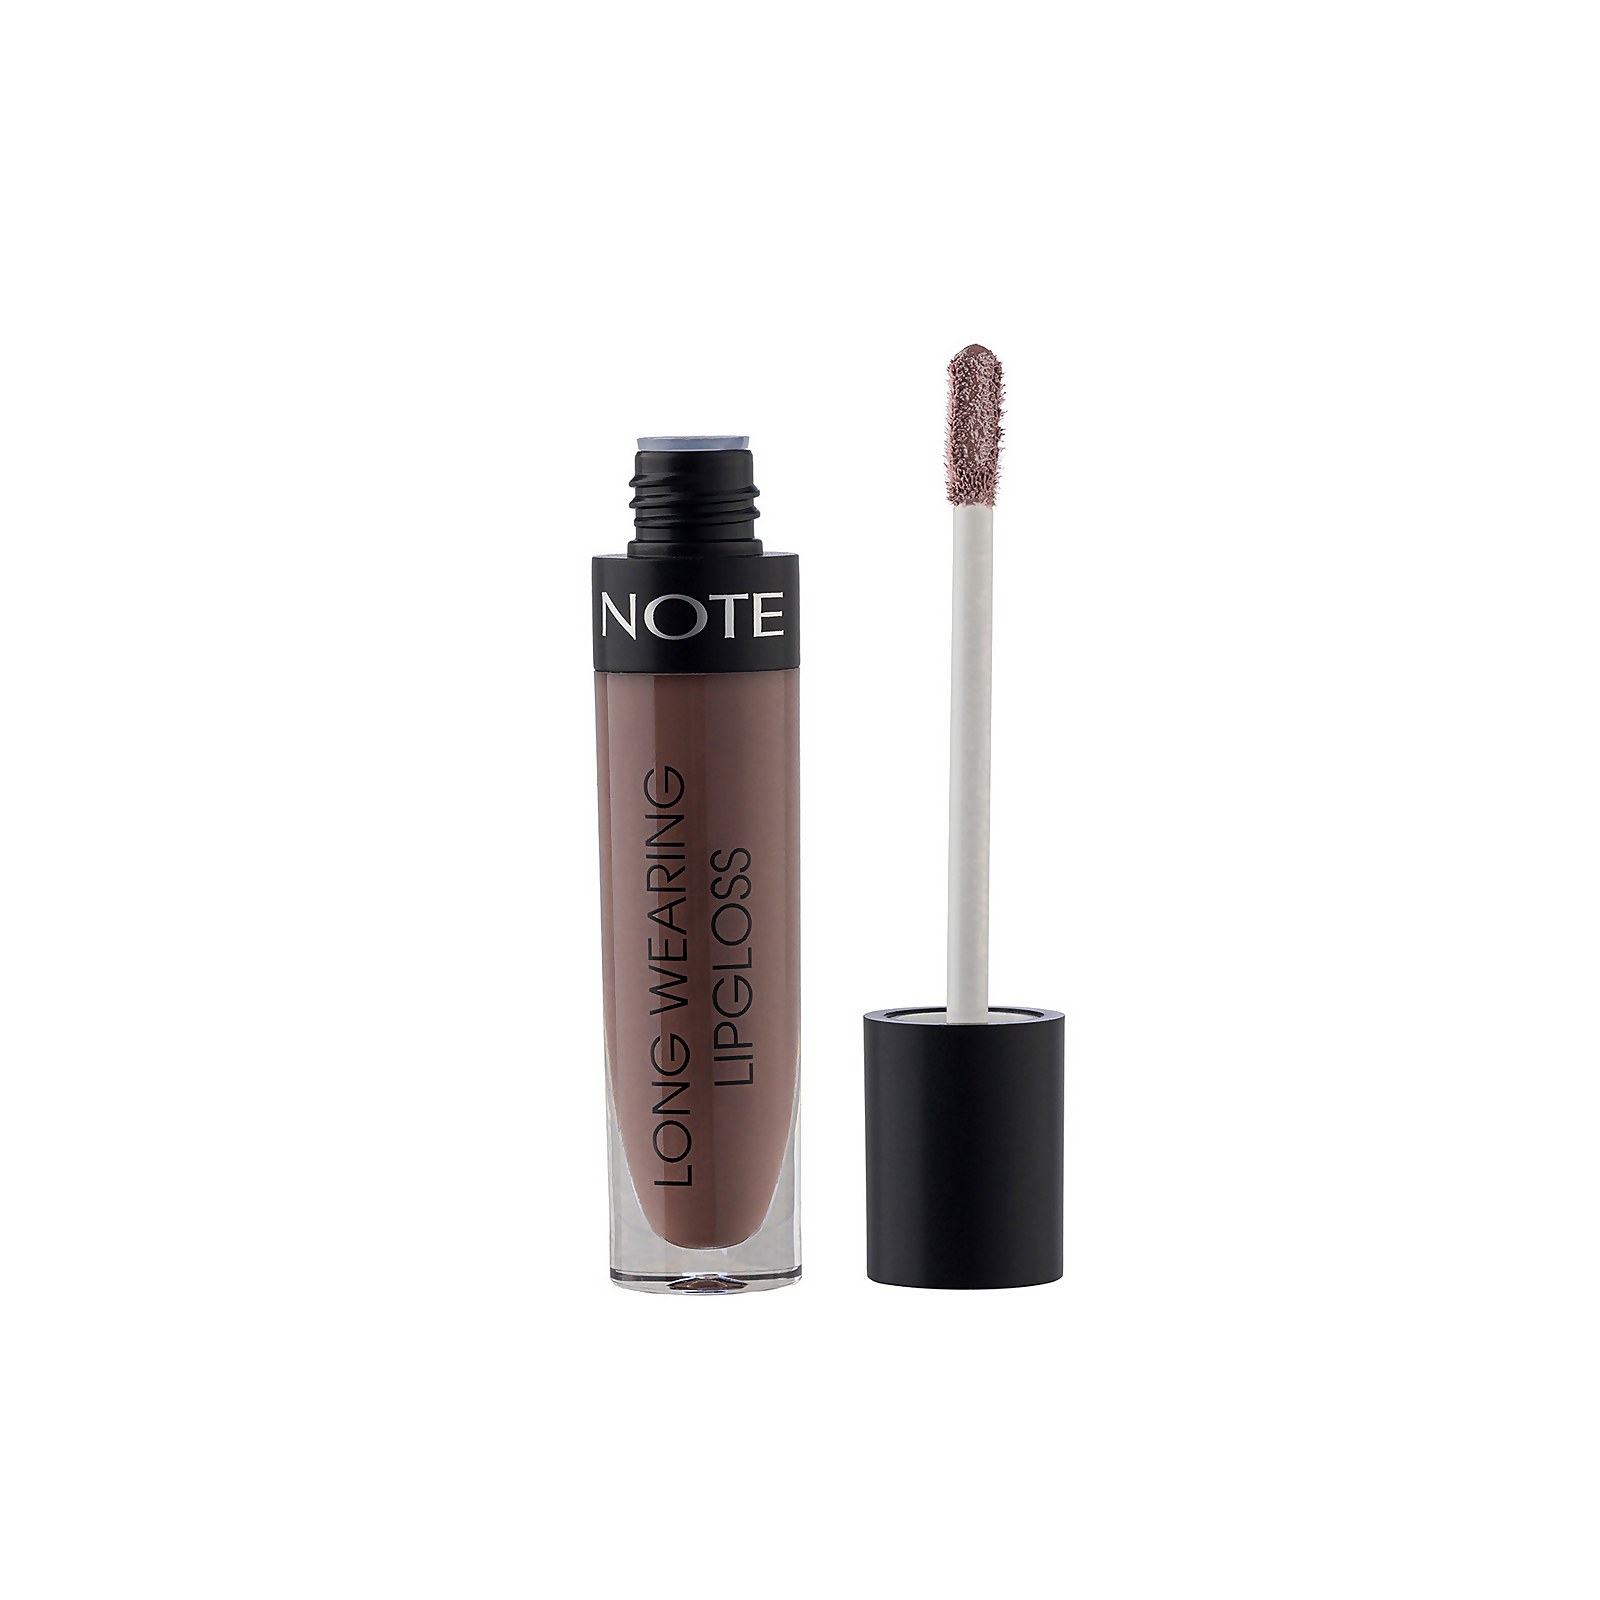 Image of Note Cosmetics Long Wearing Lip Gloss 6ml (Various Shades) - 19 Plum Couture